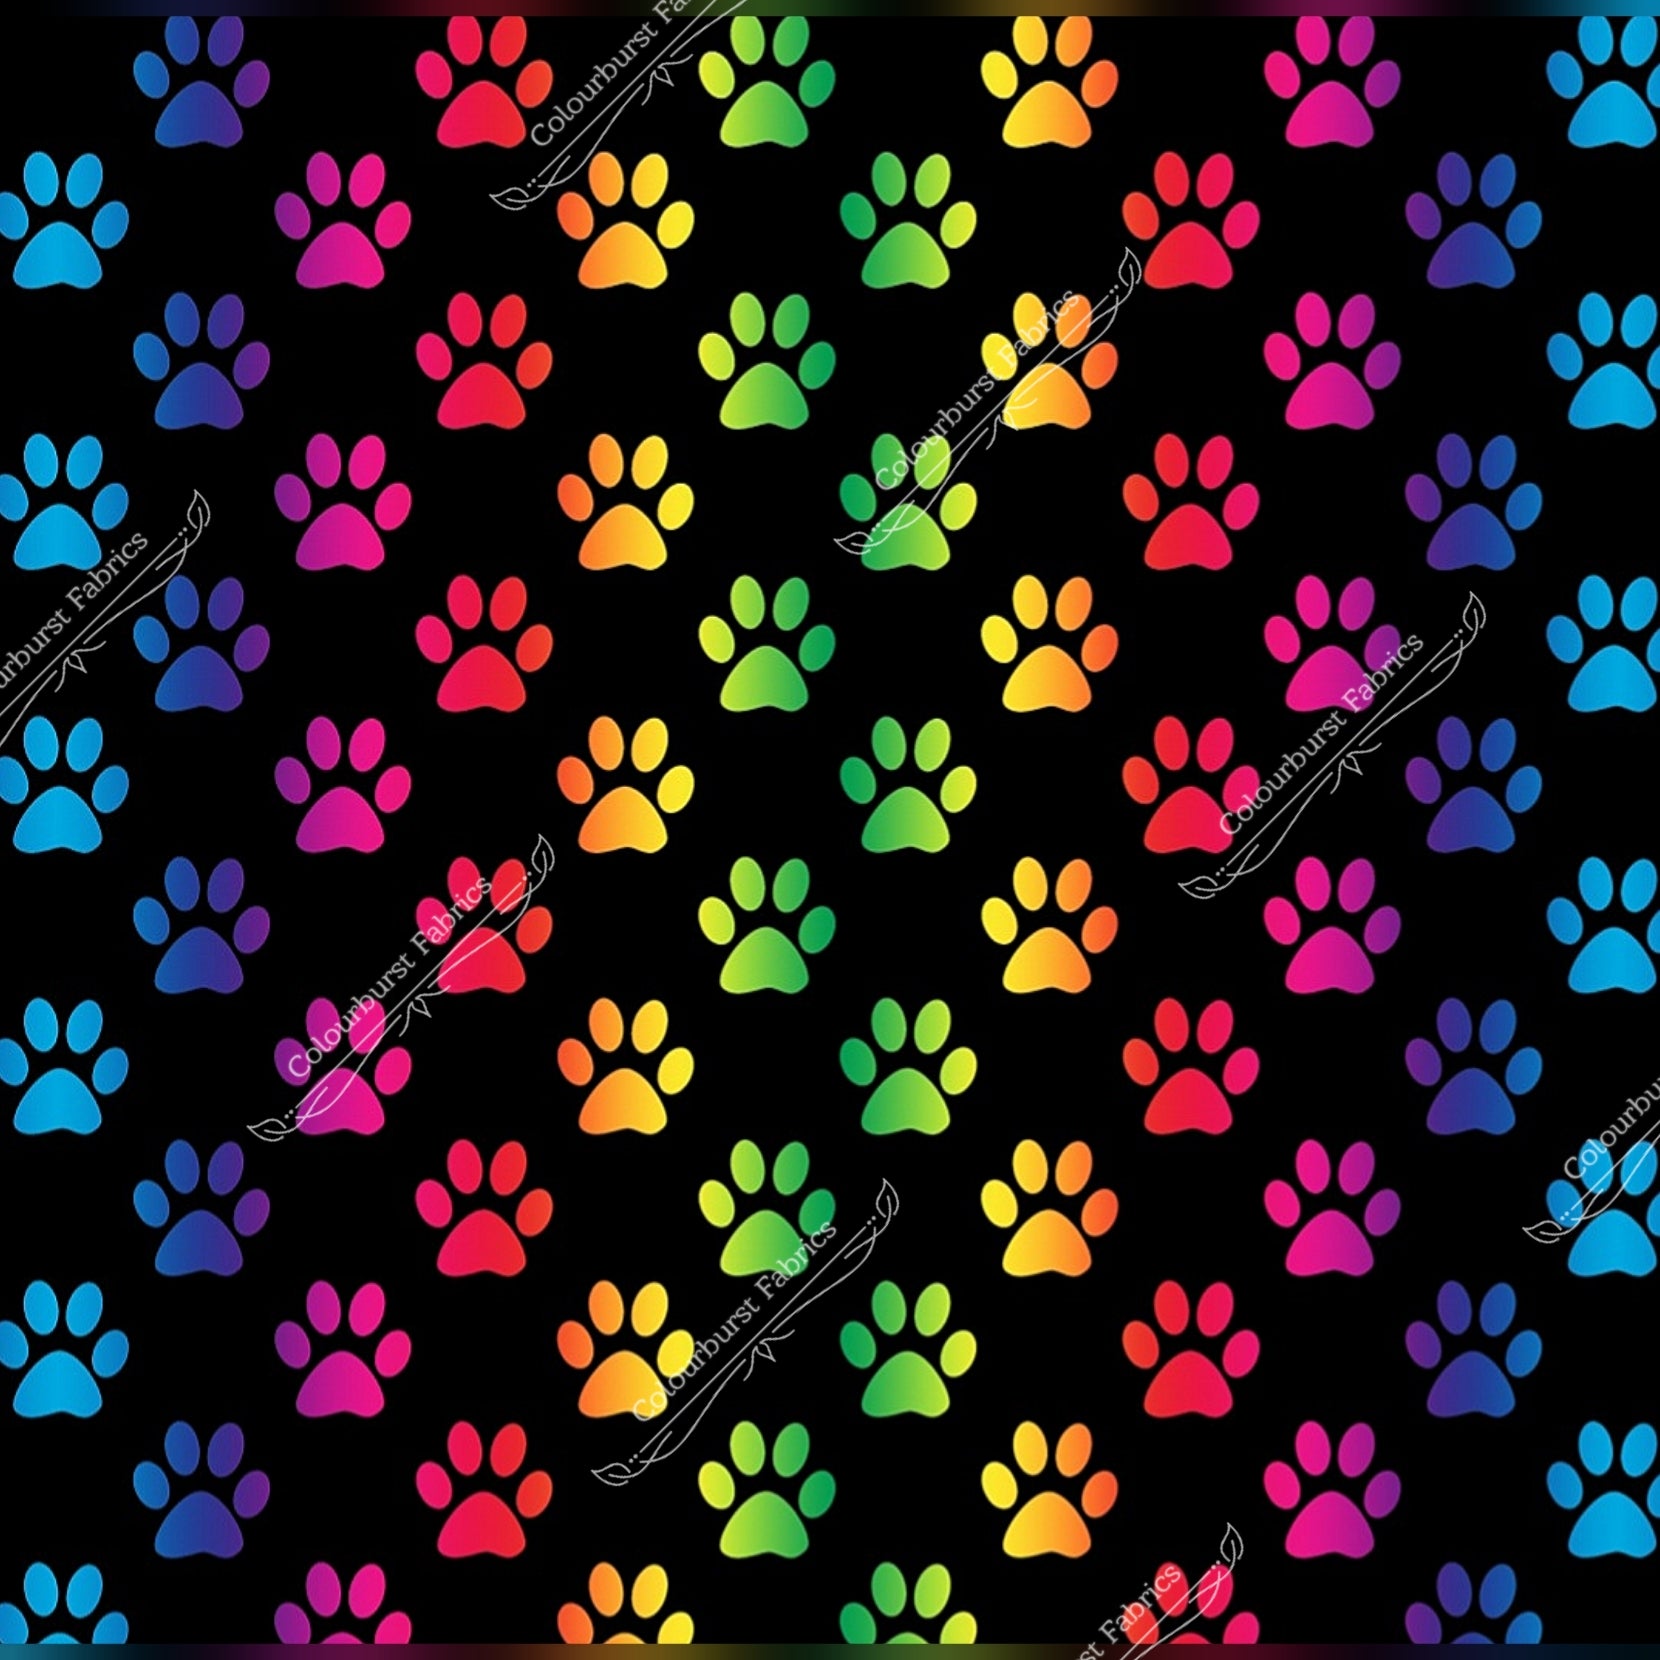 Rainbow ombre paw prints seamless design for custom fabric printing onto our 22 bases